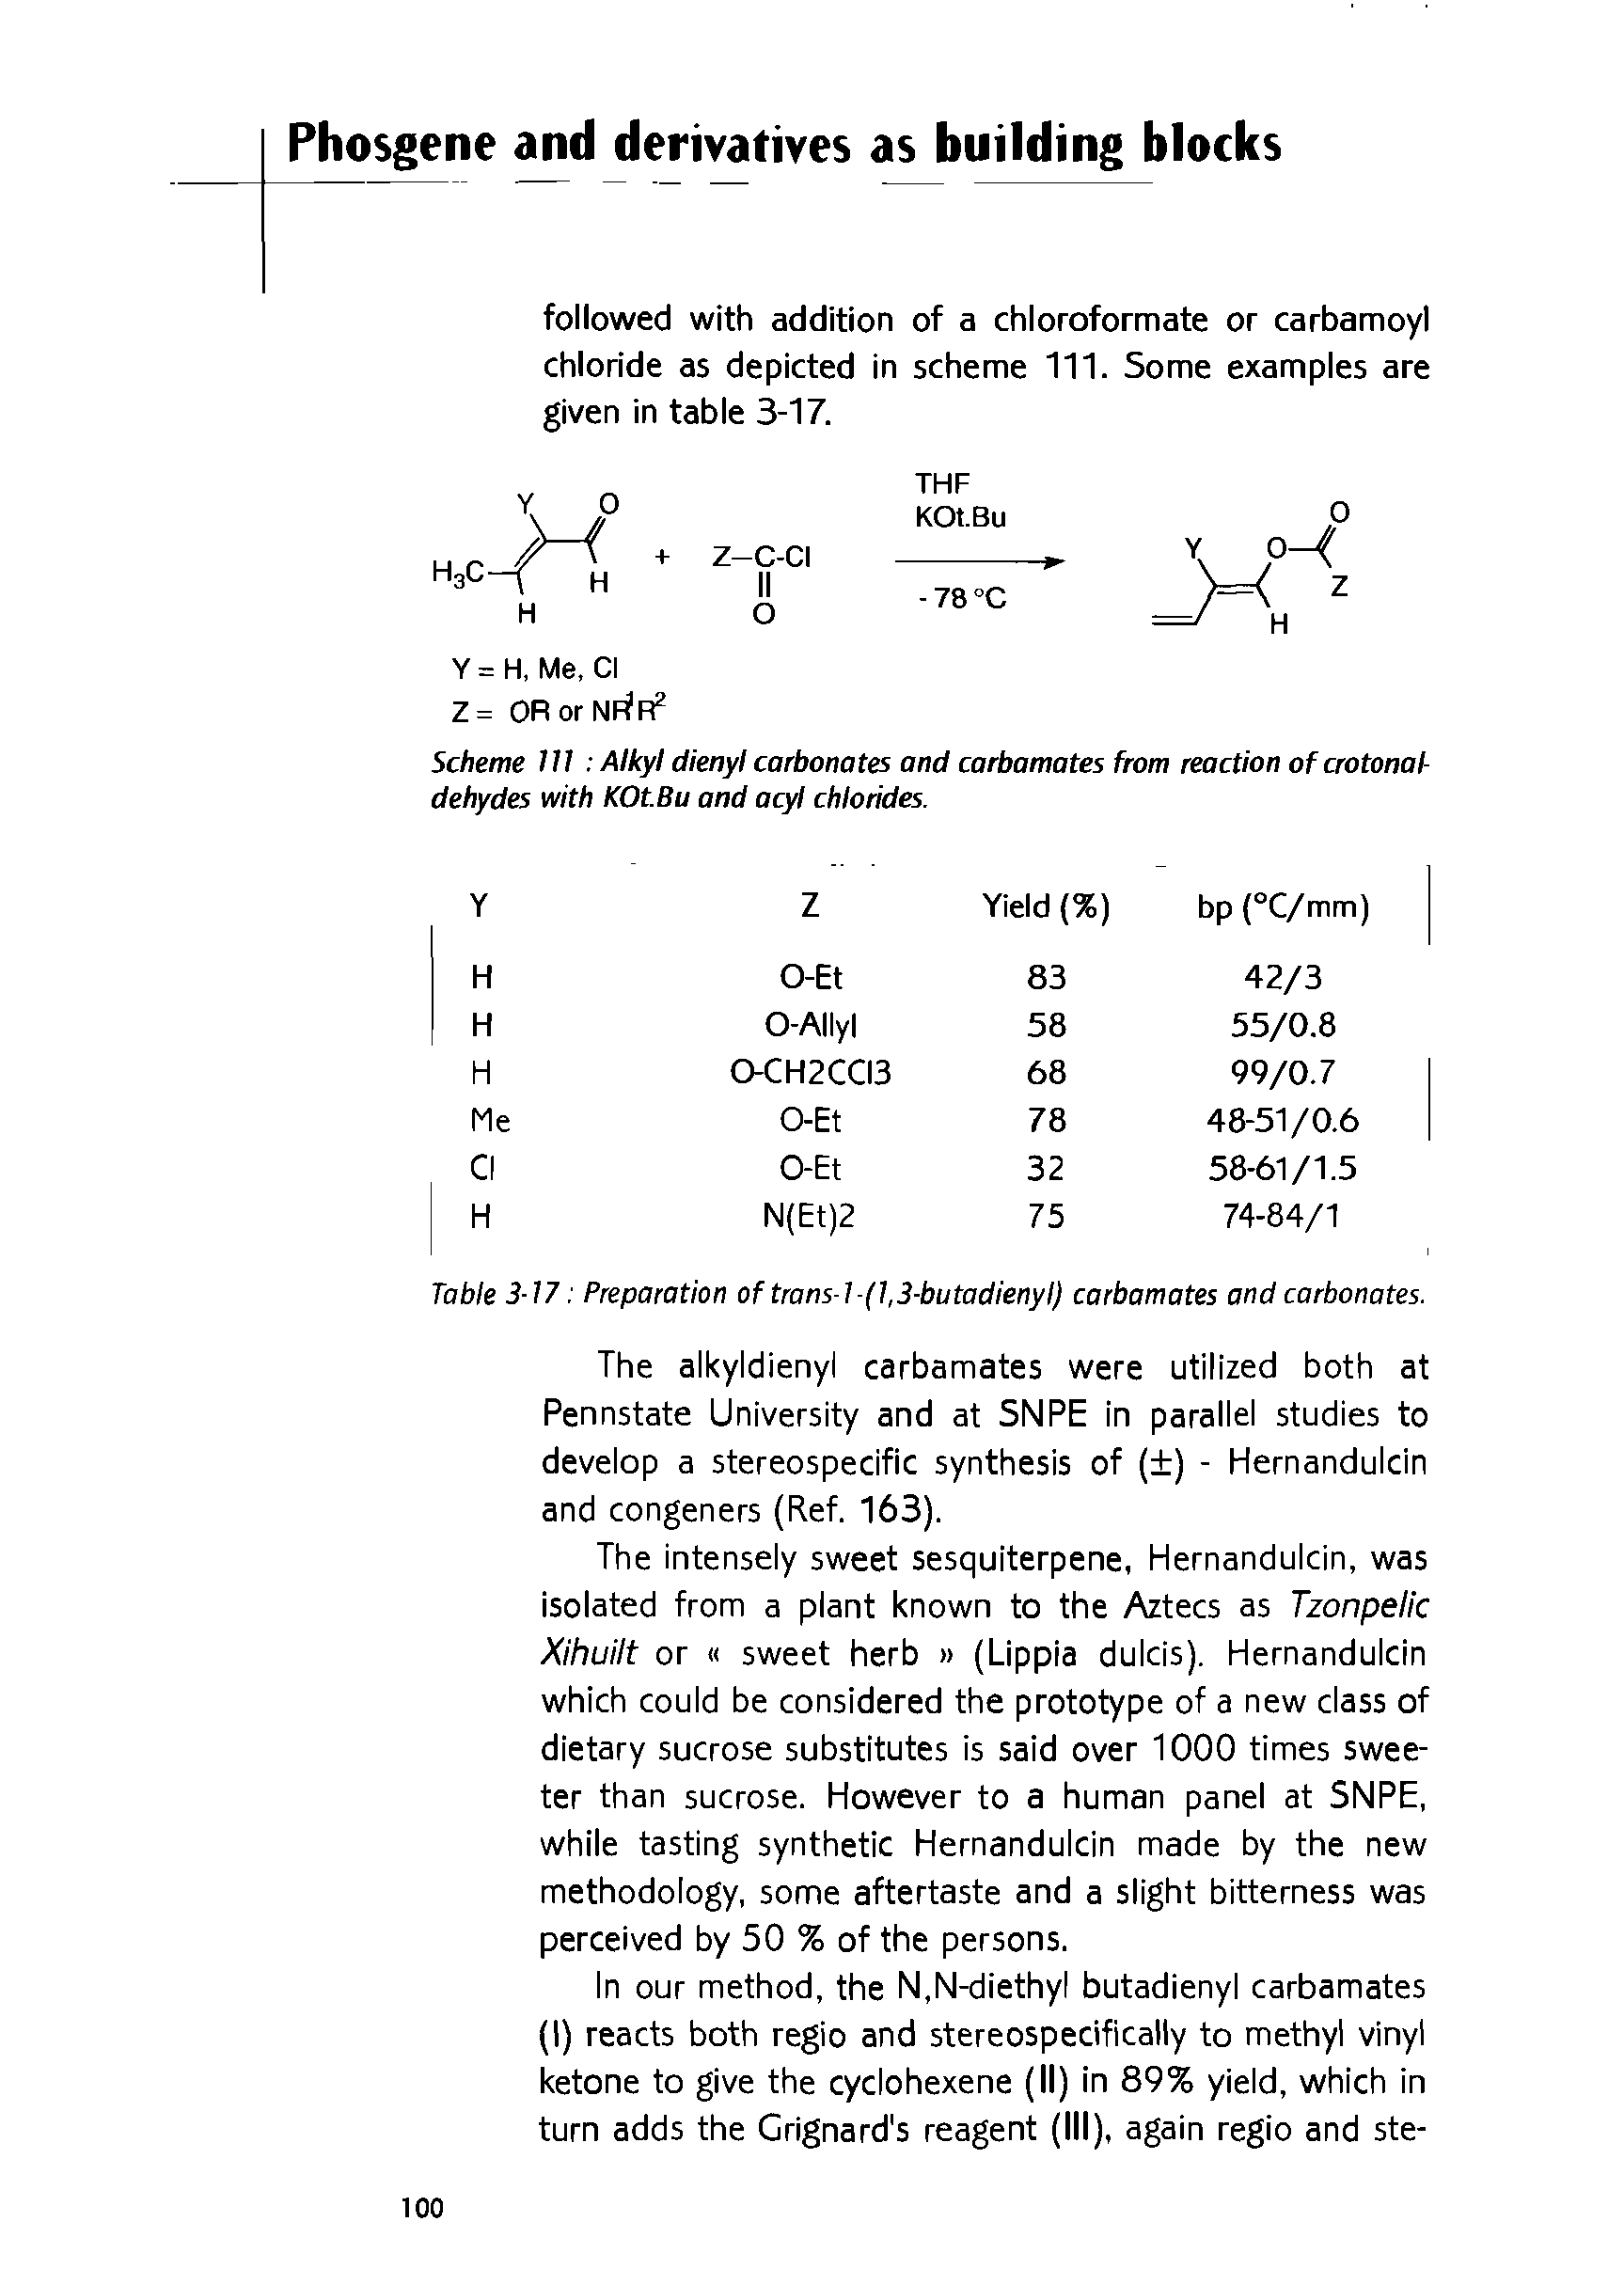 Scheme Jll Alkyl dienyl carbonates and carbamates from reaction ofcrotonal-dehydes with KOtBu and acyl chlorides.